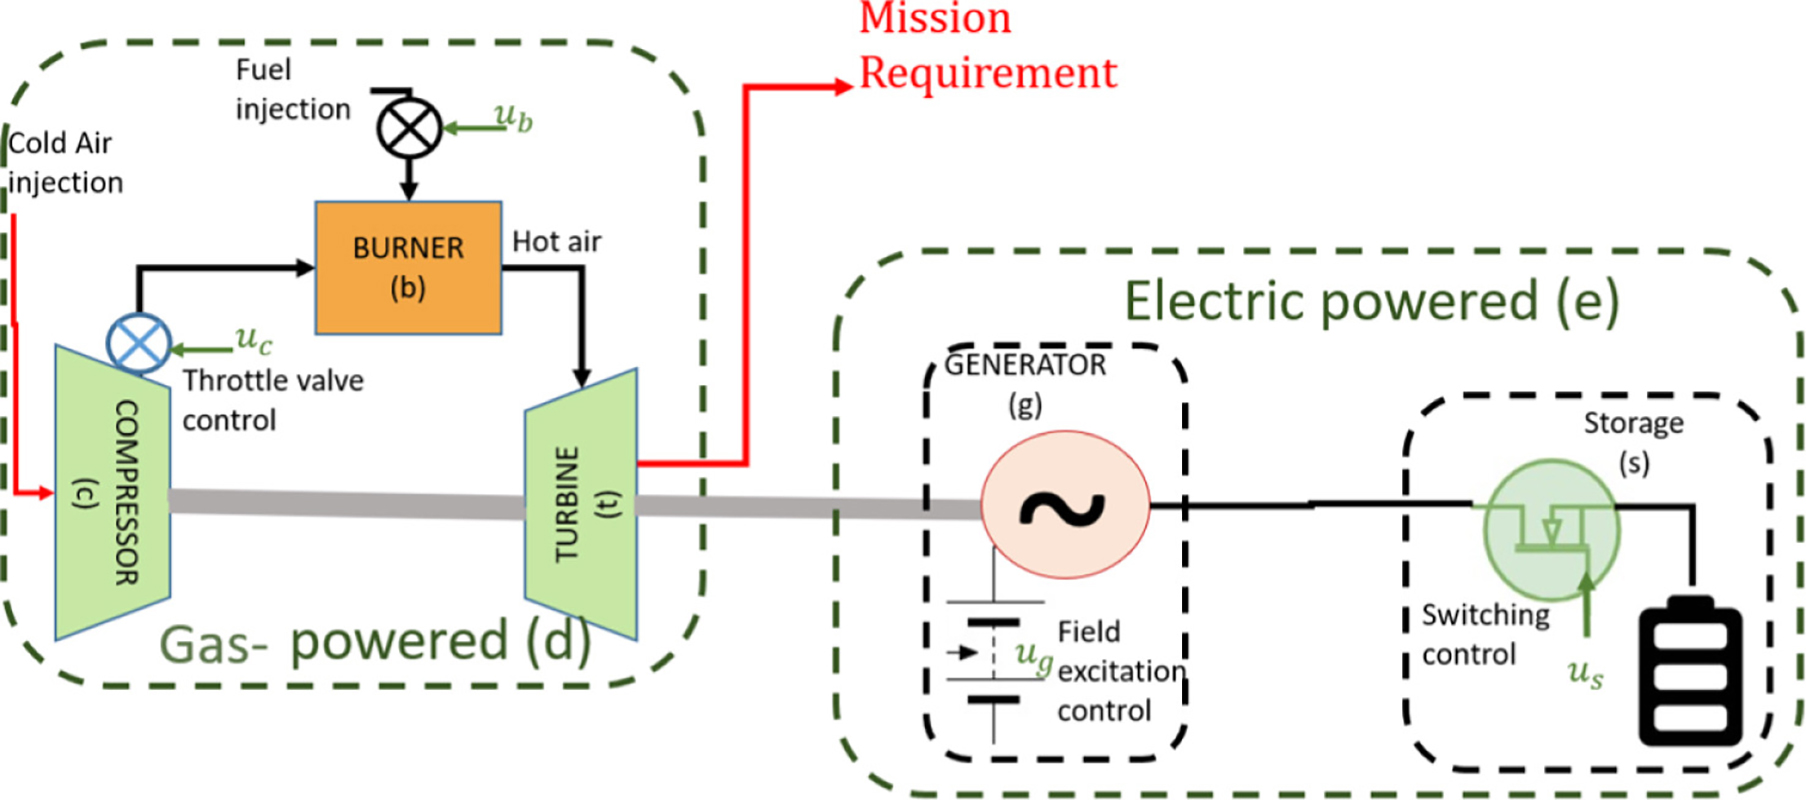 Fig. 1 from the paper: Candidate Turbo-Electric Distributed Propulsion (TeDP) system architecture. The disturbances are shown with red arrows while the available actuators are shown with green arrows.